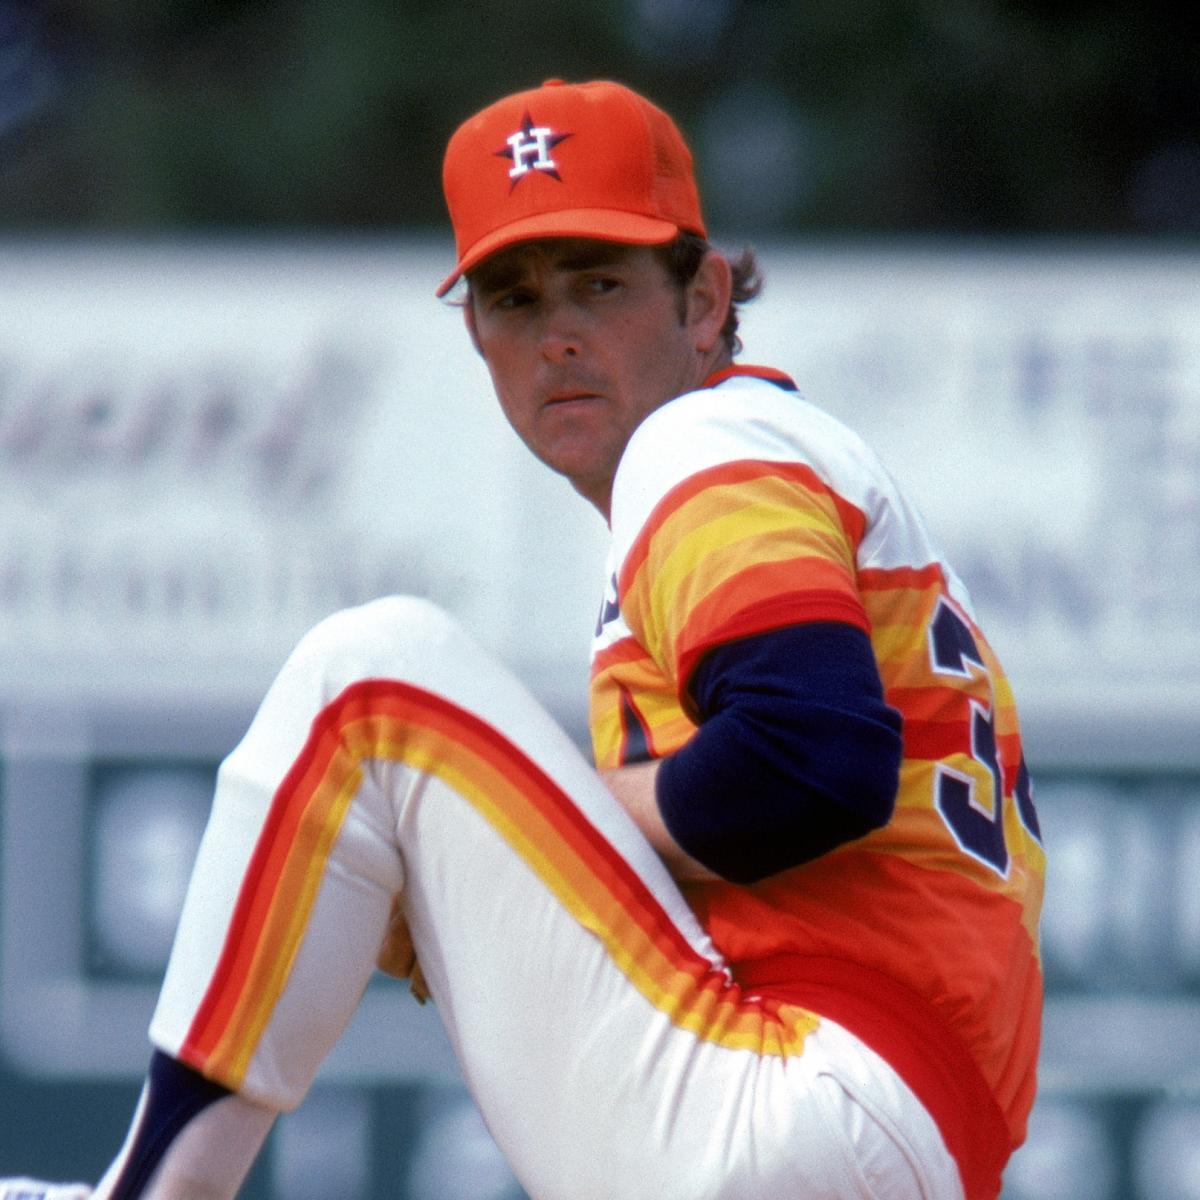 What Pros Wear: Top 10 Throwback MLB Jerseys - What Pros Wear